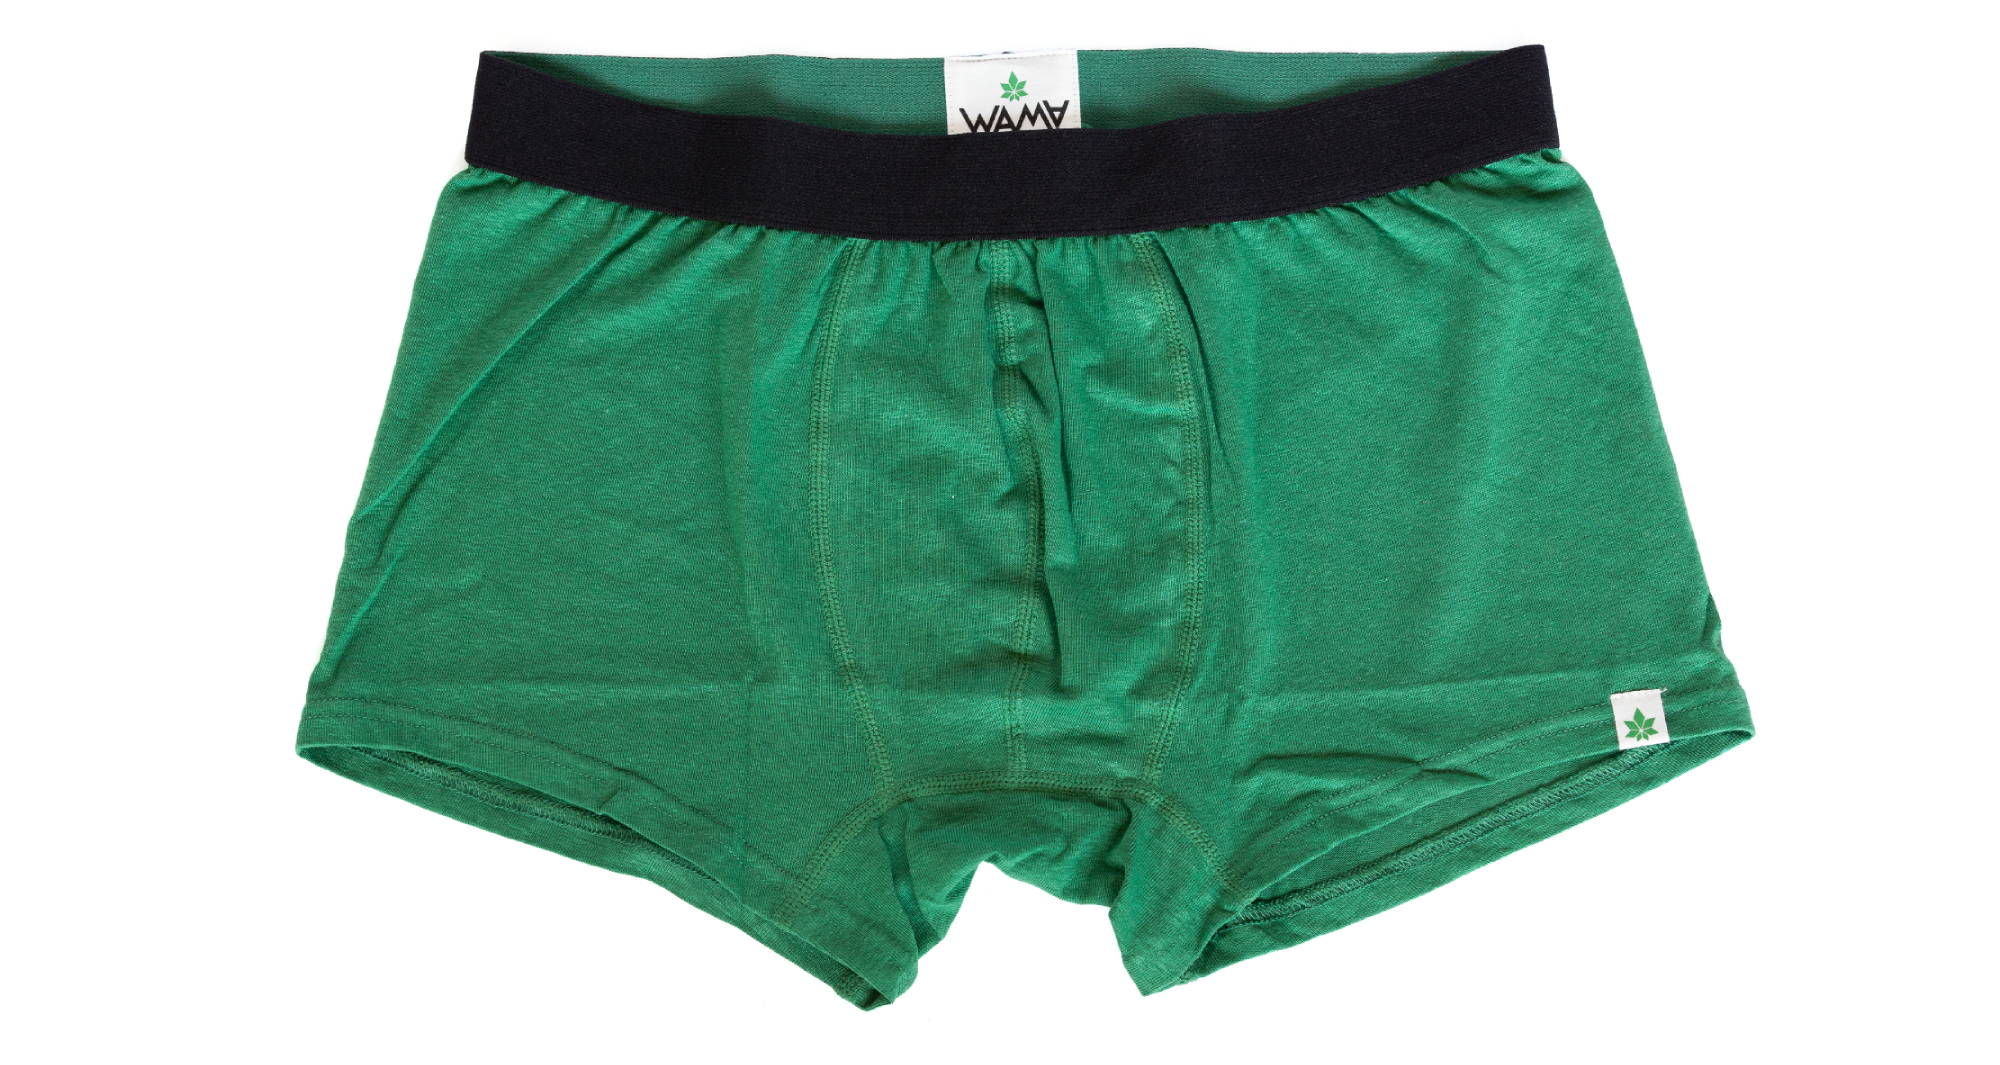 Top 8 Better Ways to Say Underwear What Does the Word “Underwear” in Slang  Mean?, by Nahin Mahamud